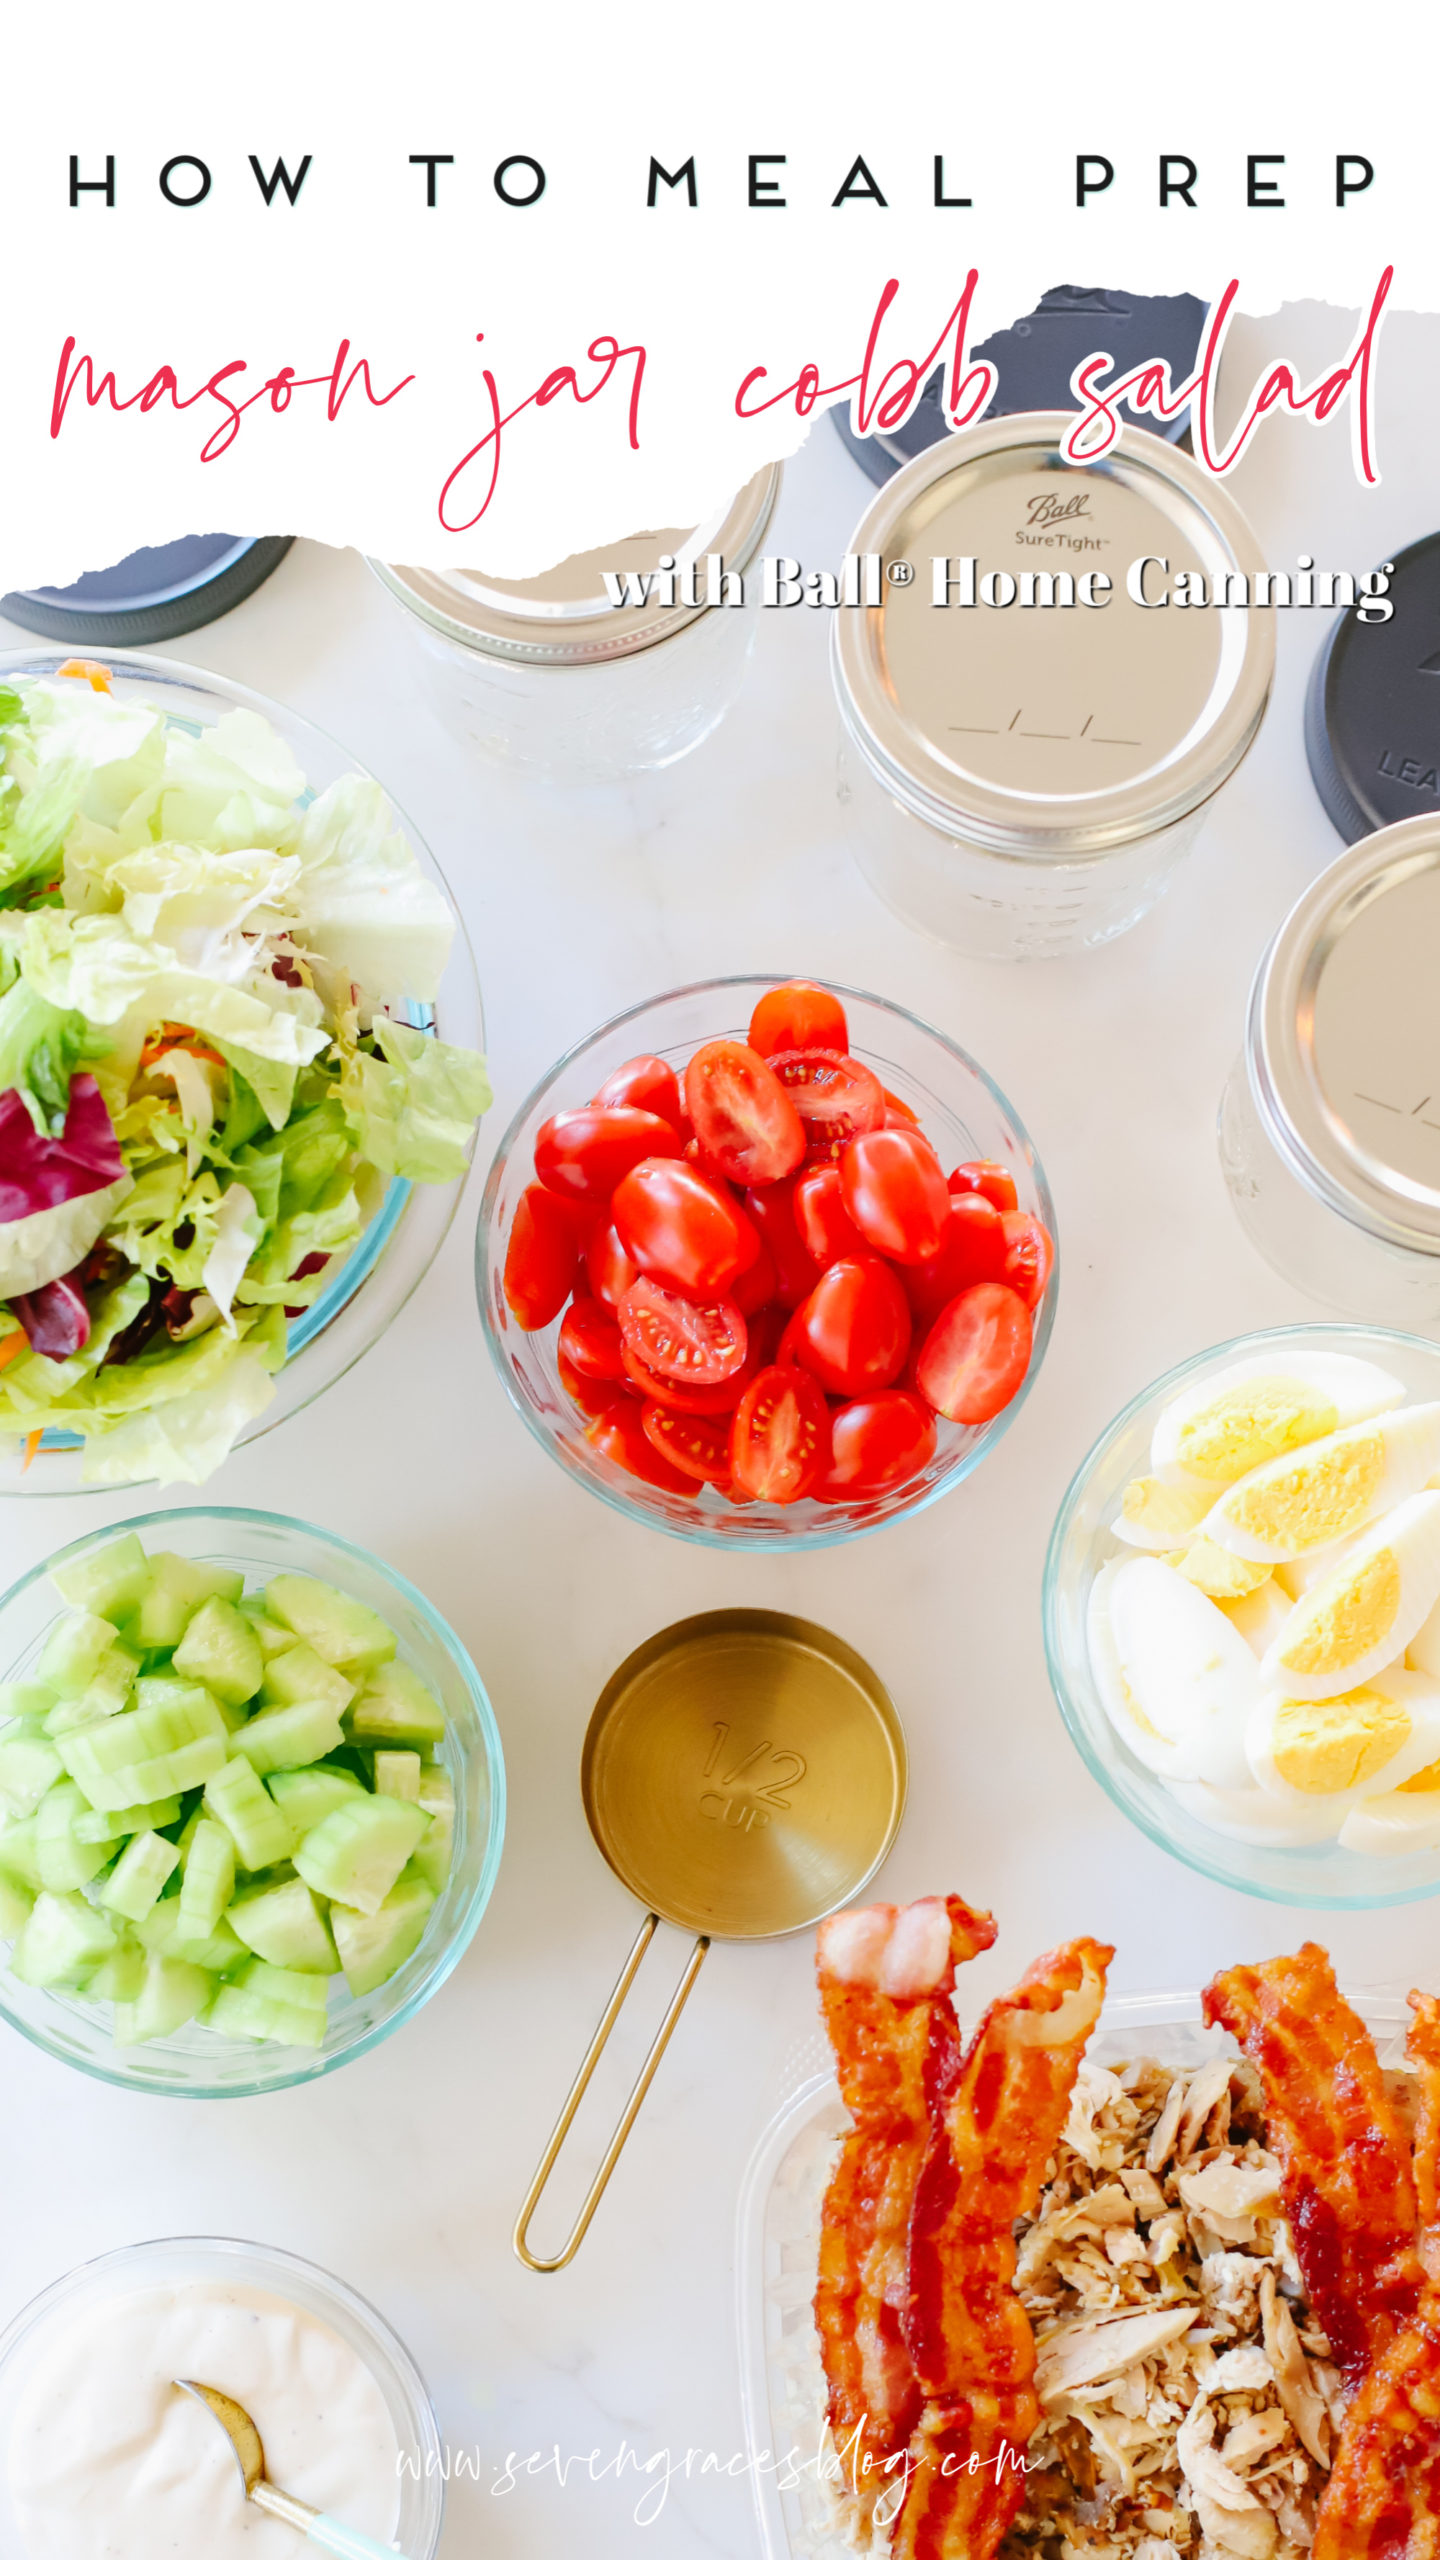 Meal prep with Ball® Jar to create the perfect Cobb Salad (Keto & Whole30 approved)! Add an easy and nutritious salad to your meal prep routine, always ready to go to help you stay on track! It's the perfect mason jar salad. #ad #Whole30WithBall #MadeWithBall #BallJars #Whole30Diet #BallInAJar @BallCanning